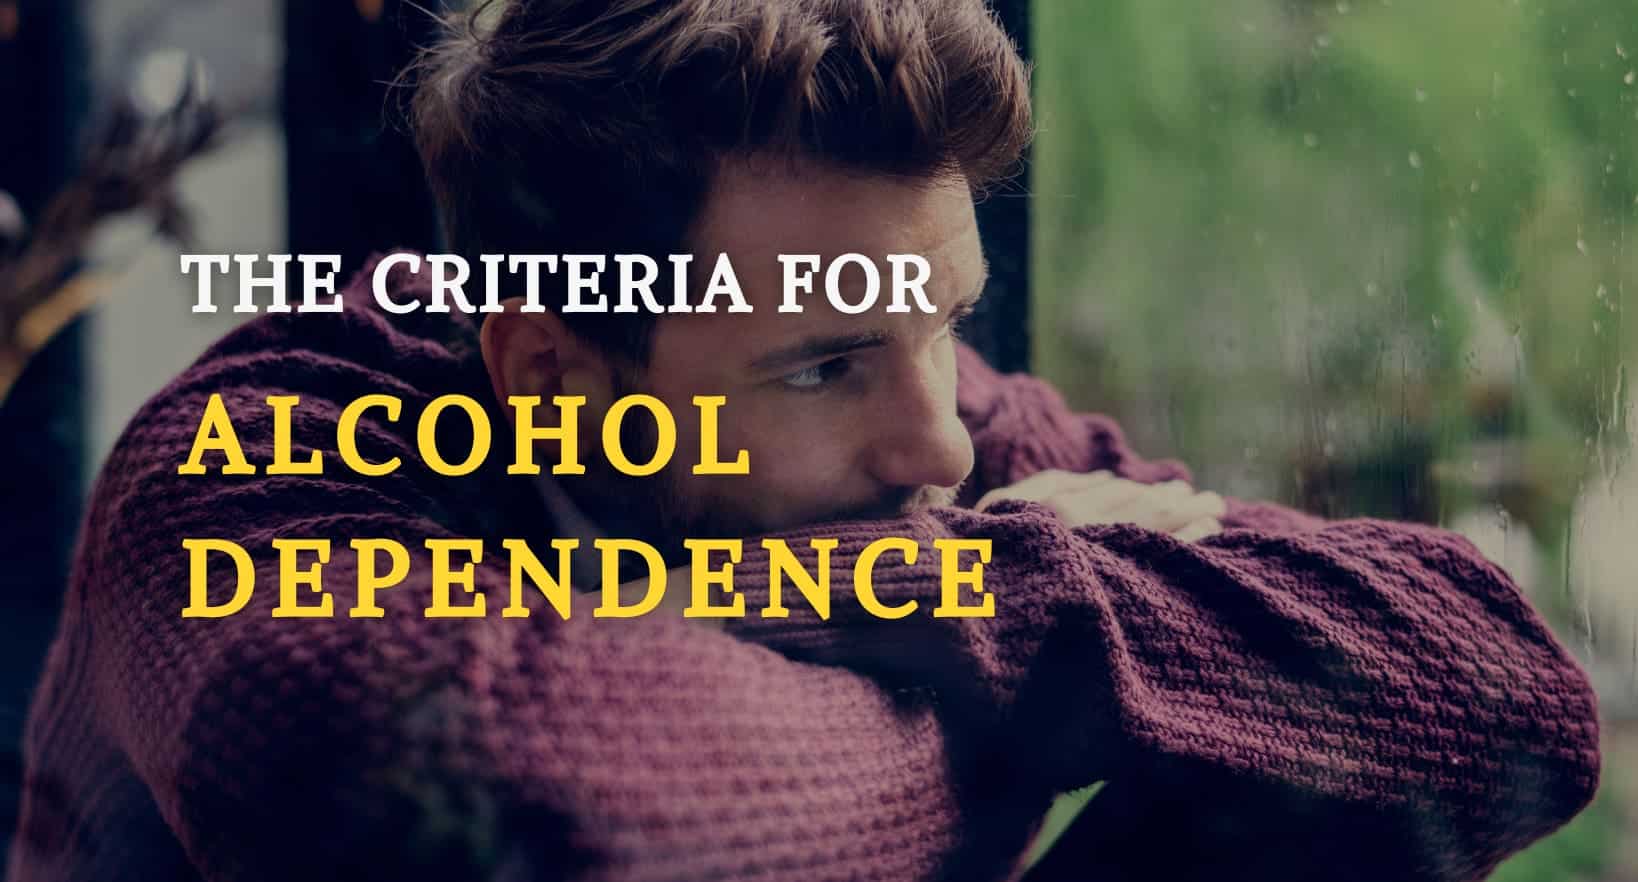 What is the Criteria for Alcohol Dependence?